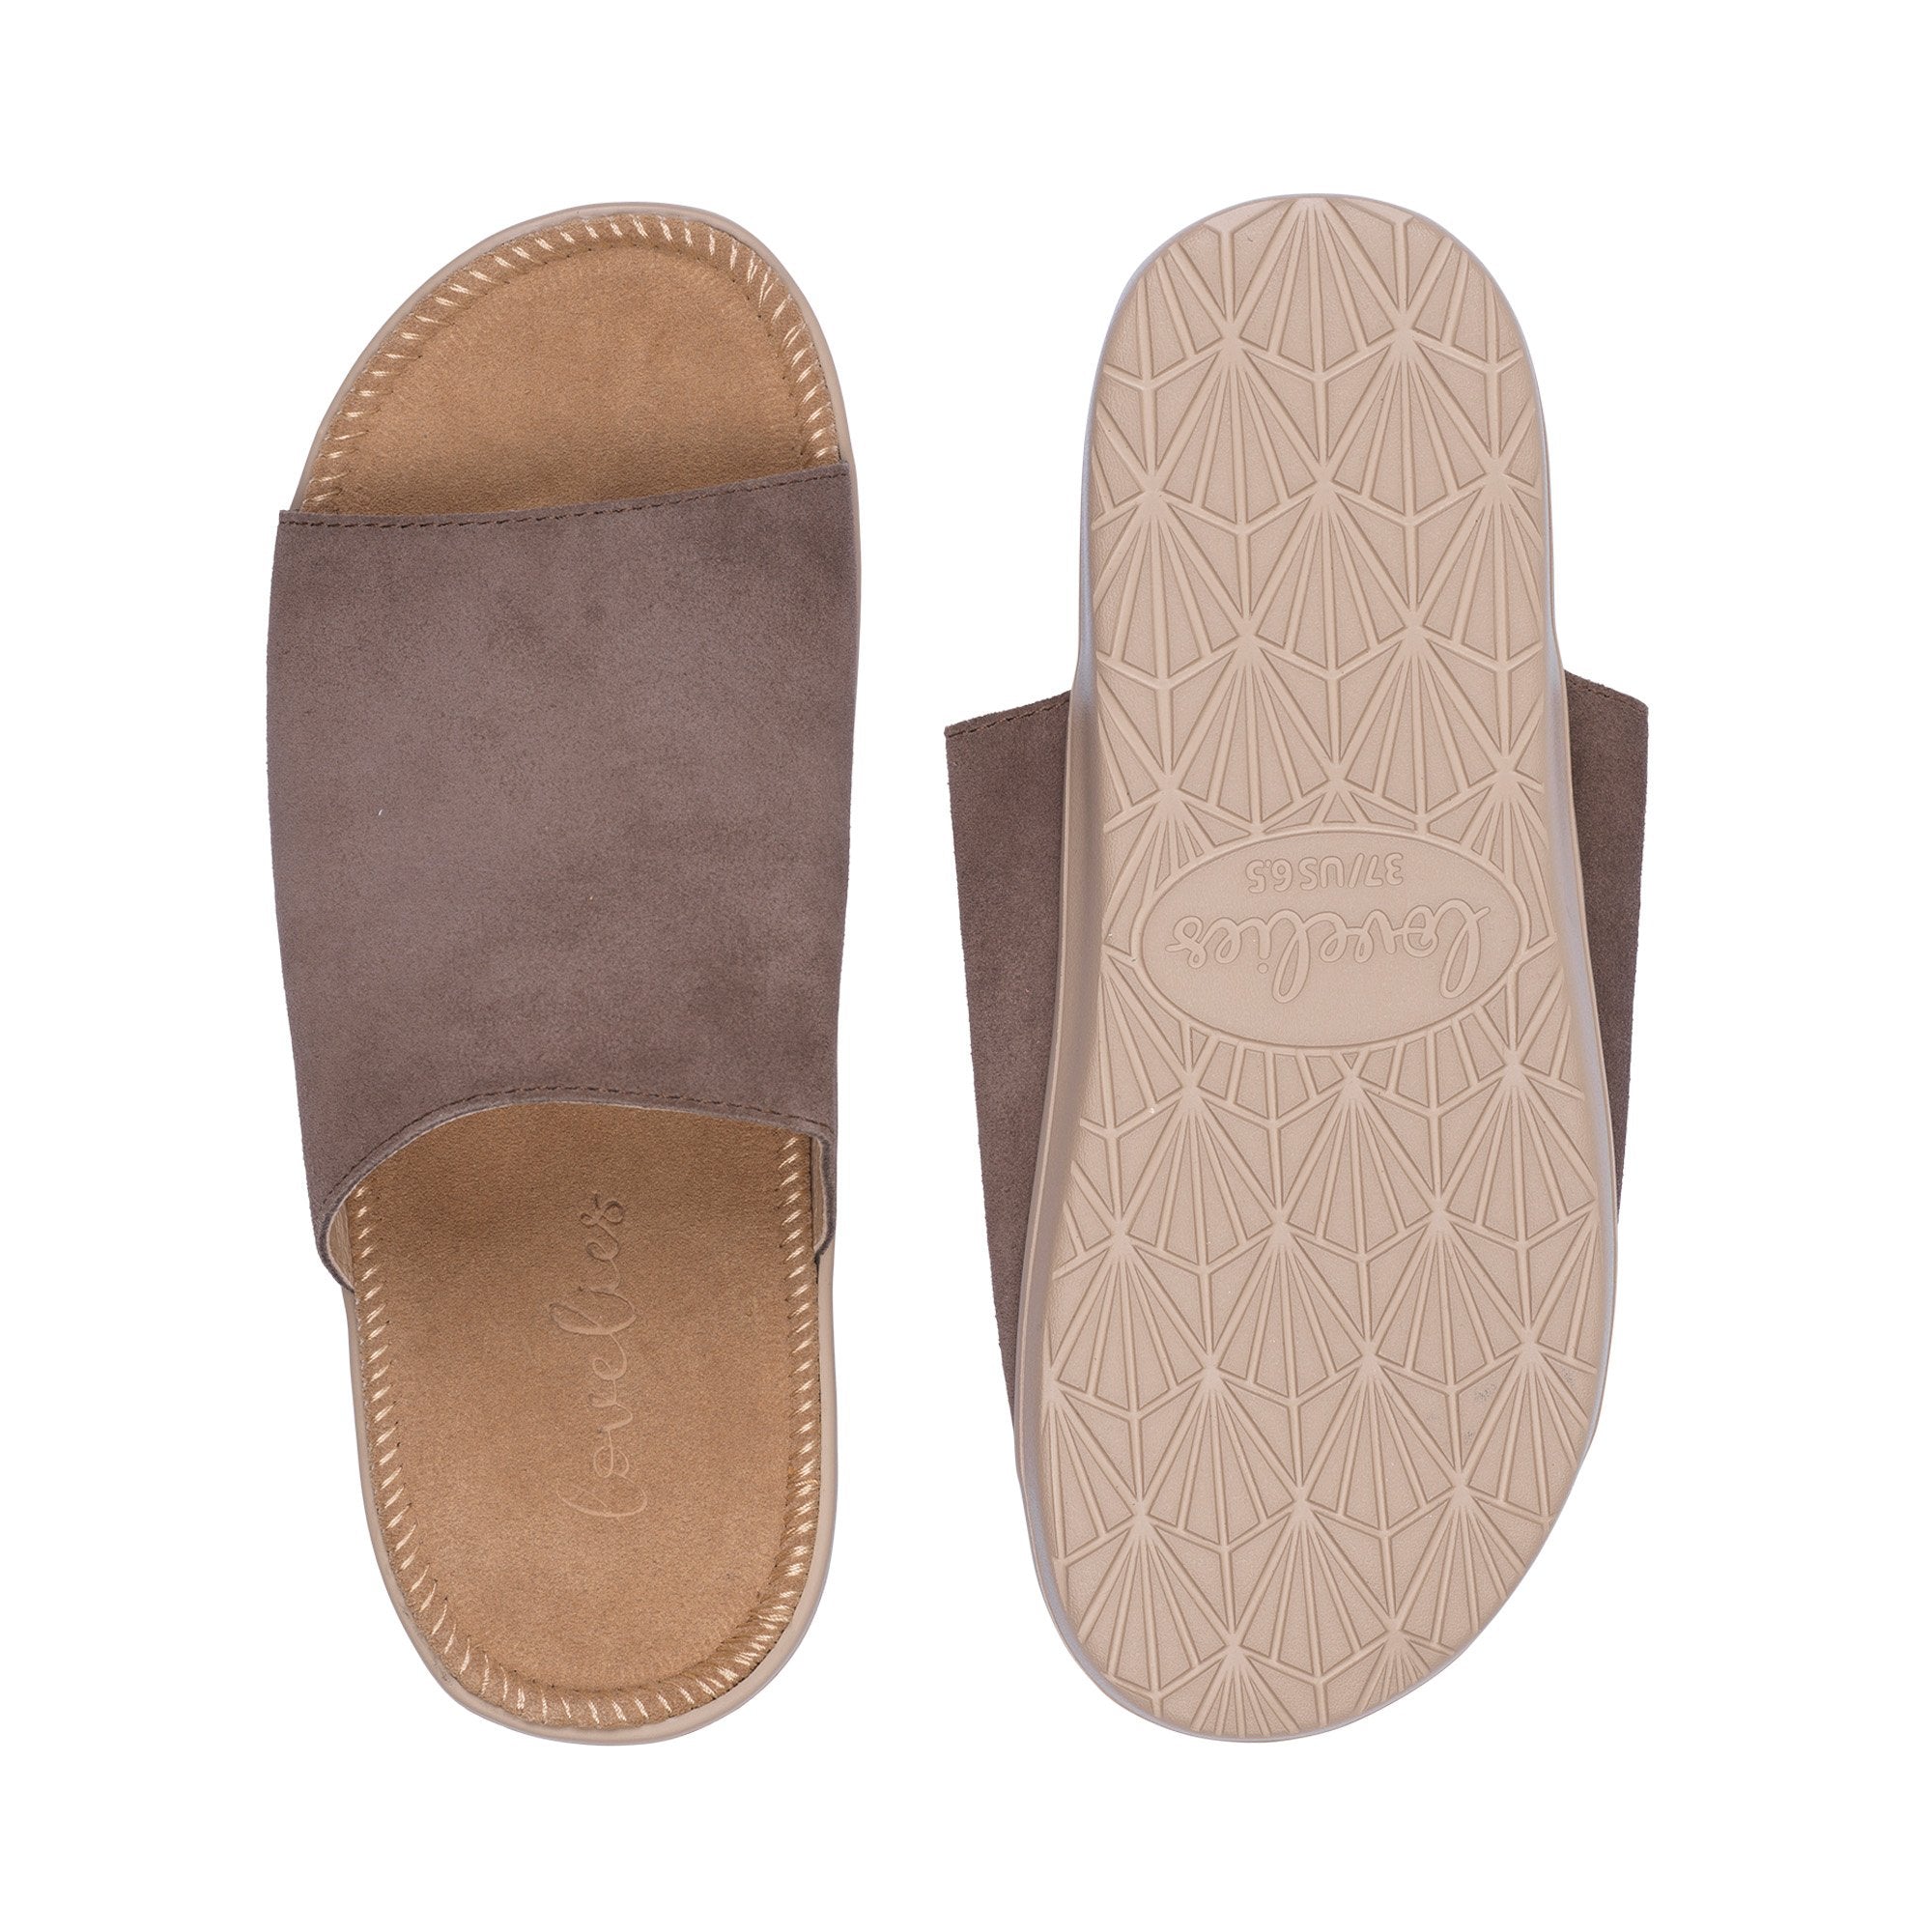 Sandals with a wide strap of soft suede. The comfortable inner sole in covered with soft suede.